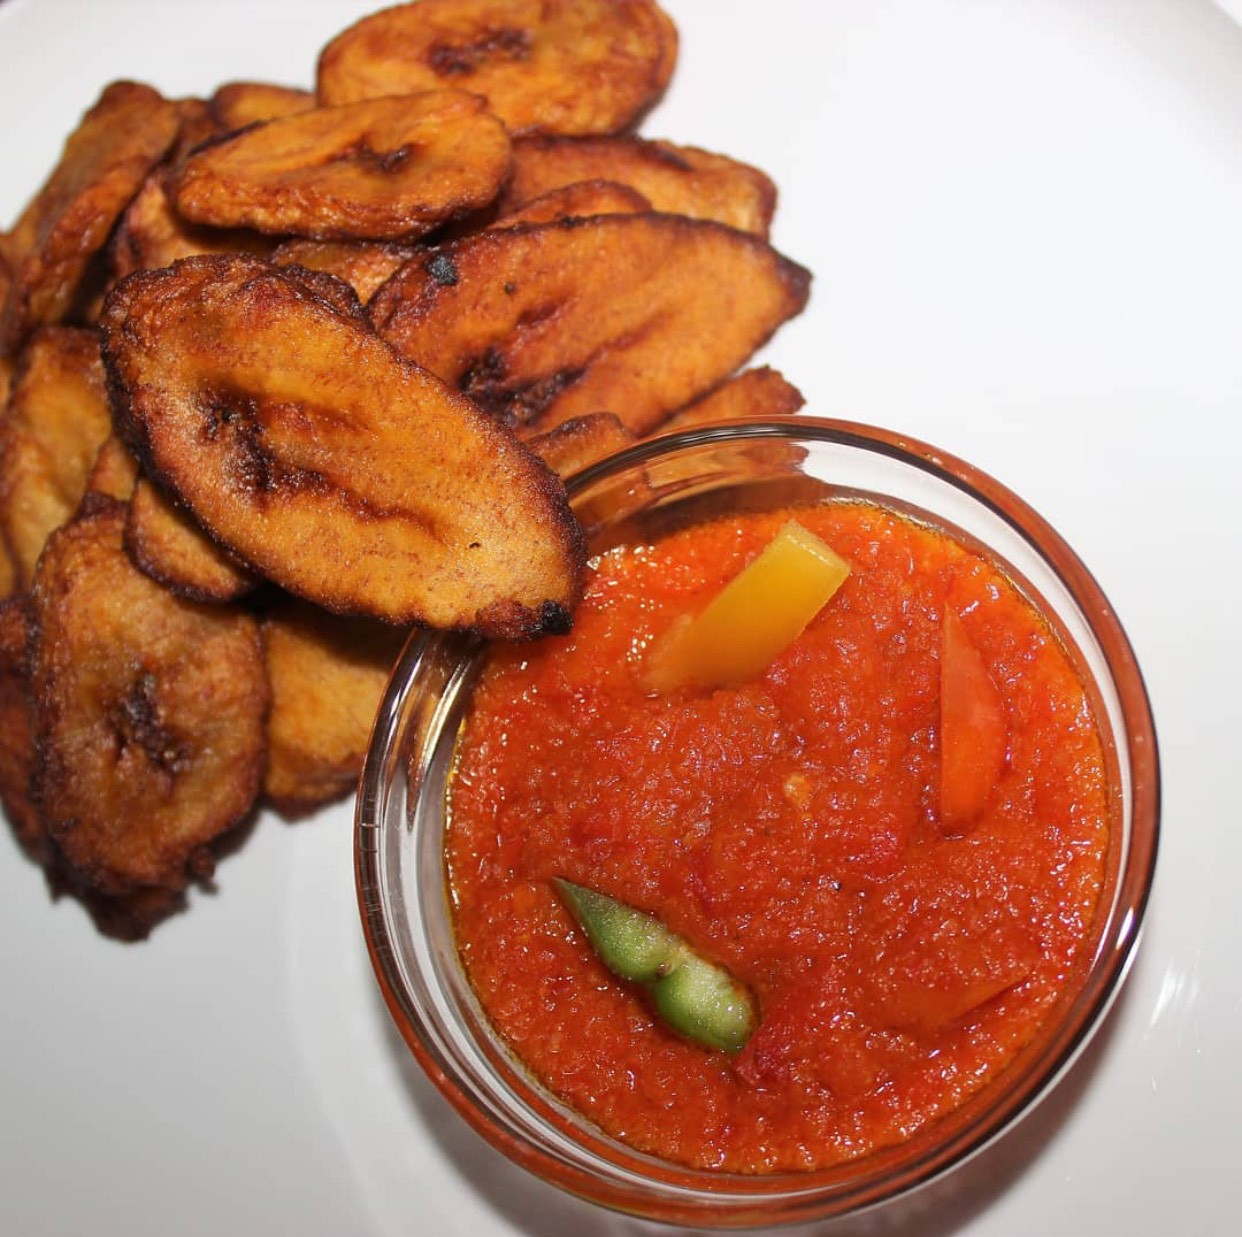 Fried/roasted Plantain with Pepper sauce